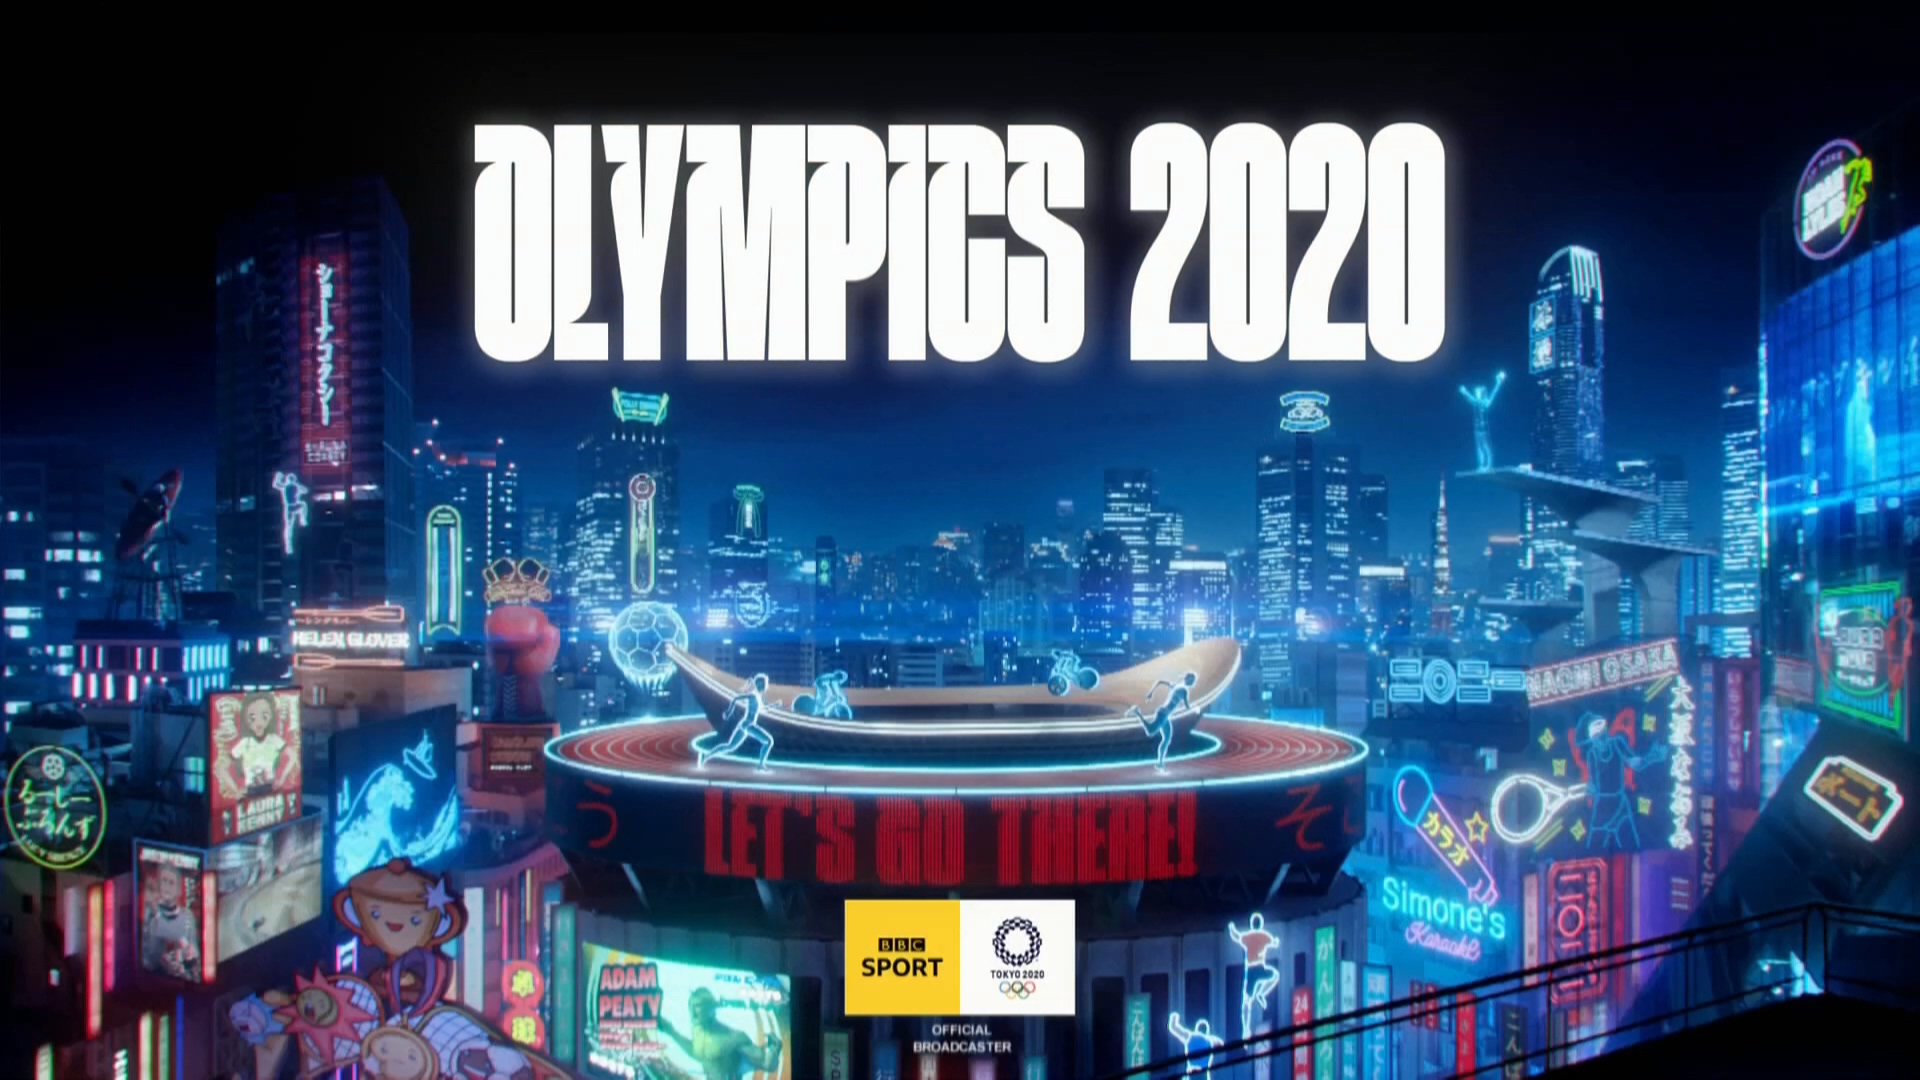 w. shaner olympic games tokyo 2020